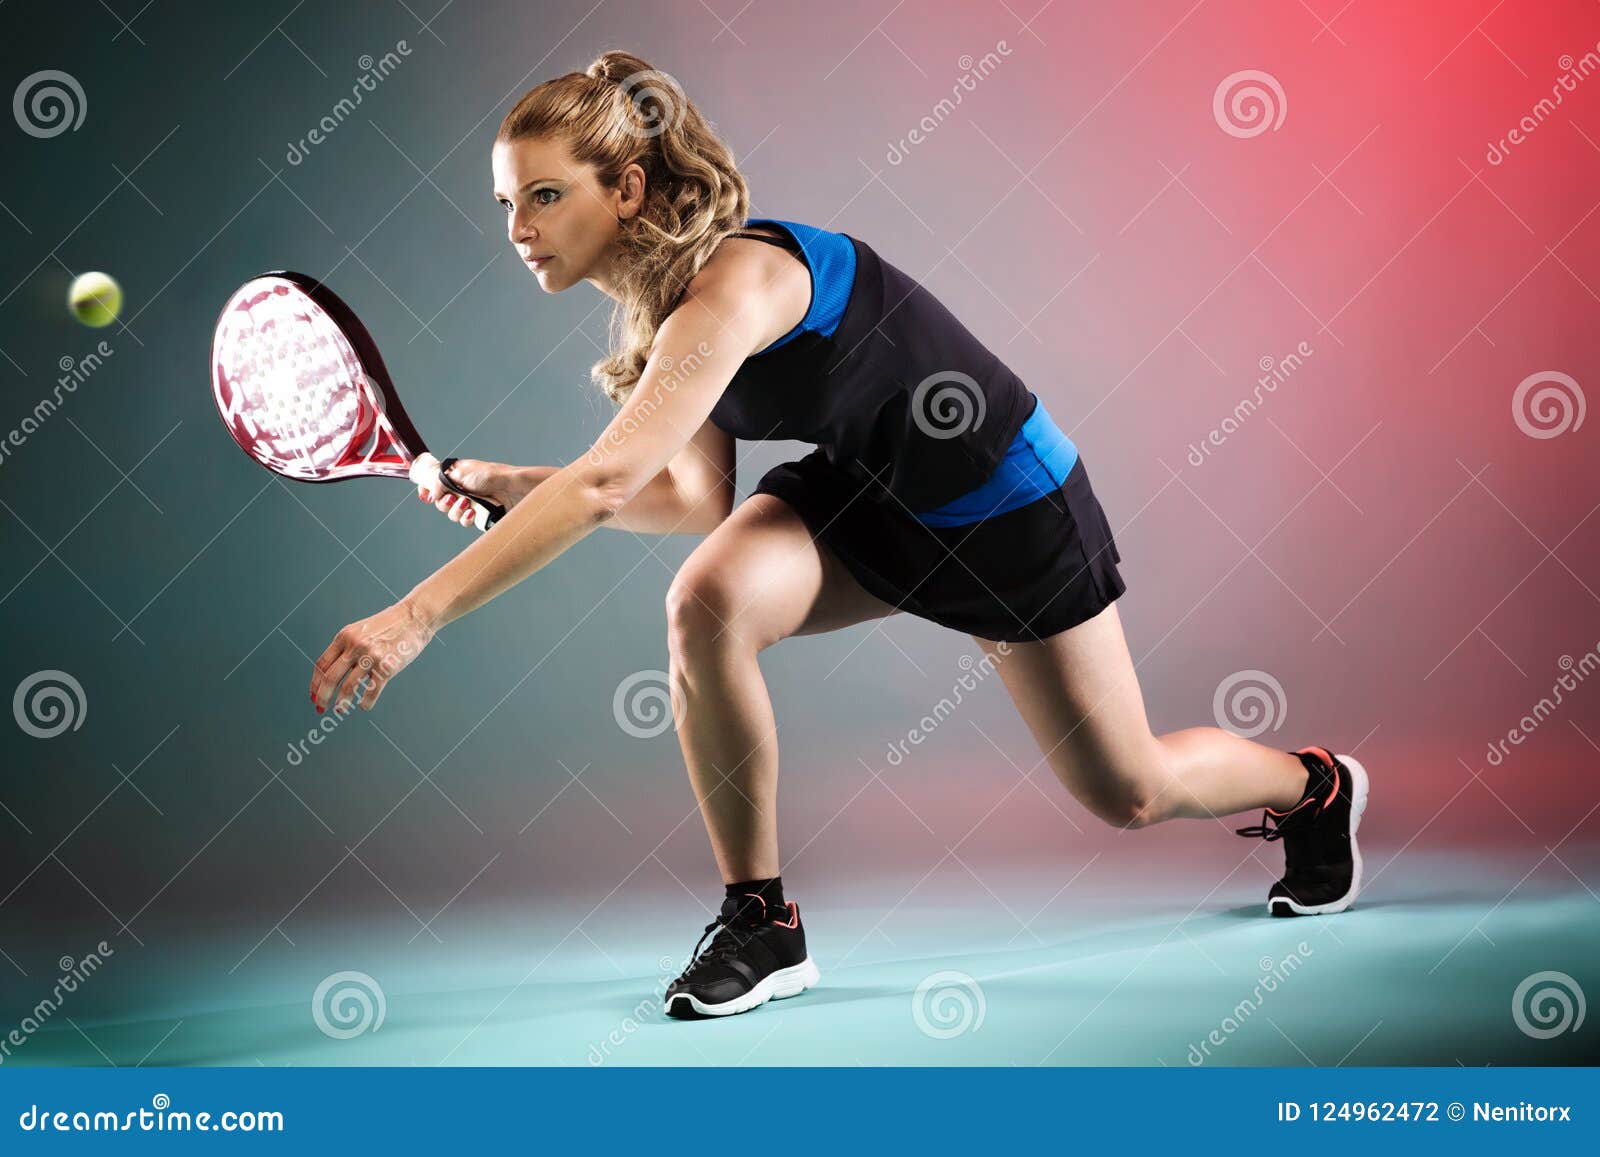 beautiful young woman playing padel indoor over multicolored background.